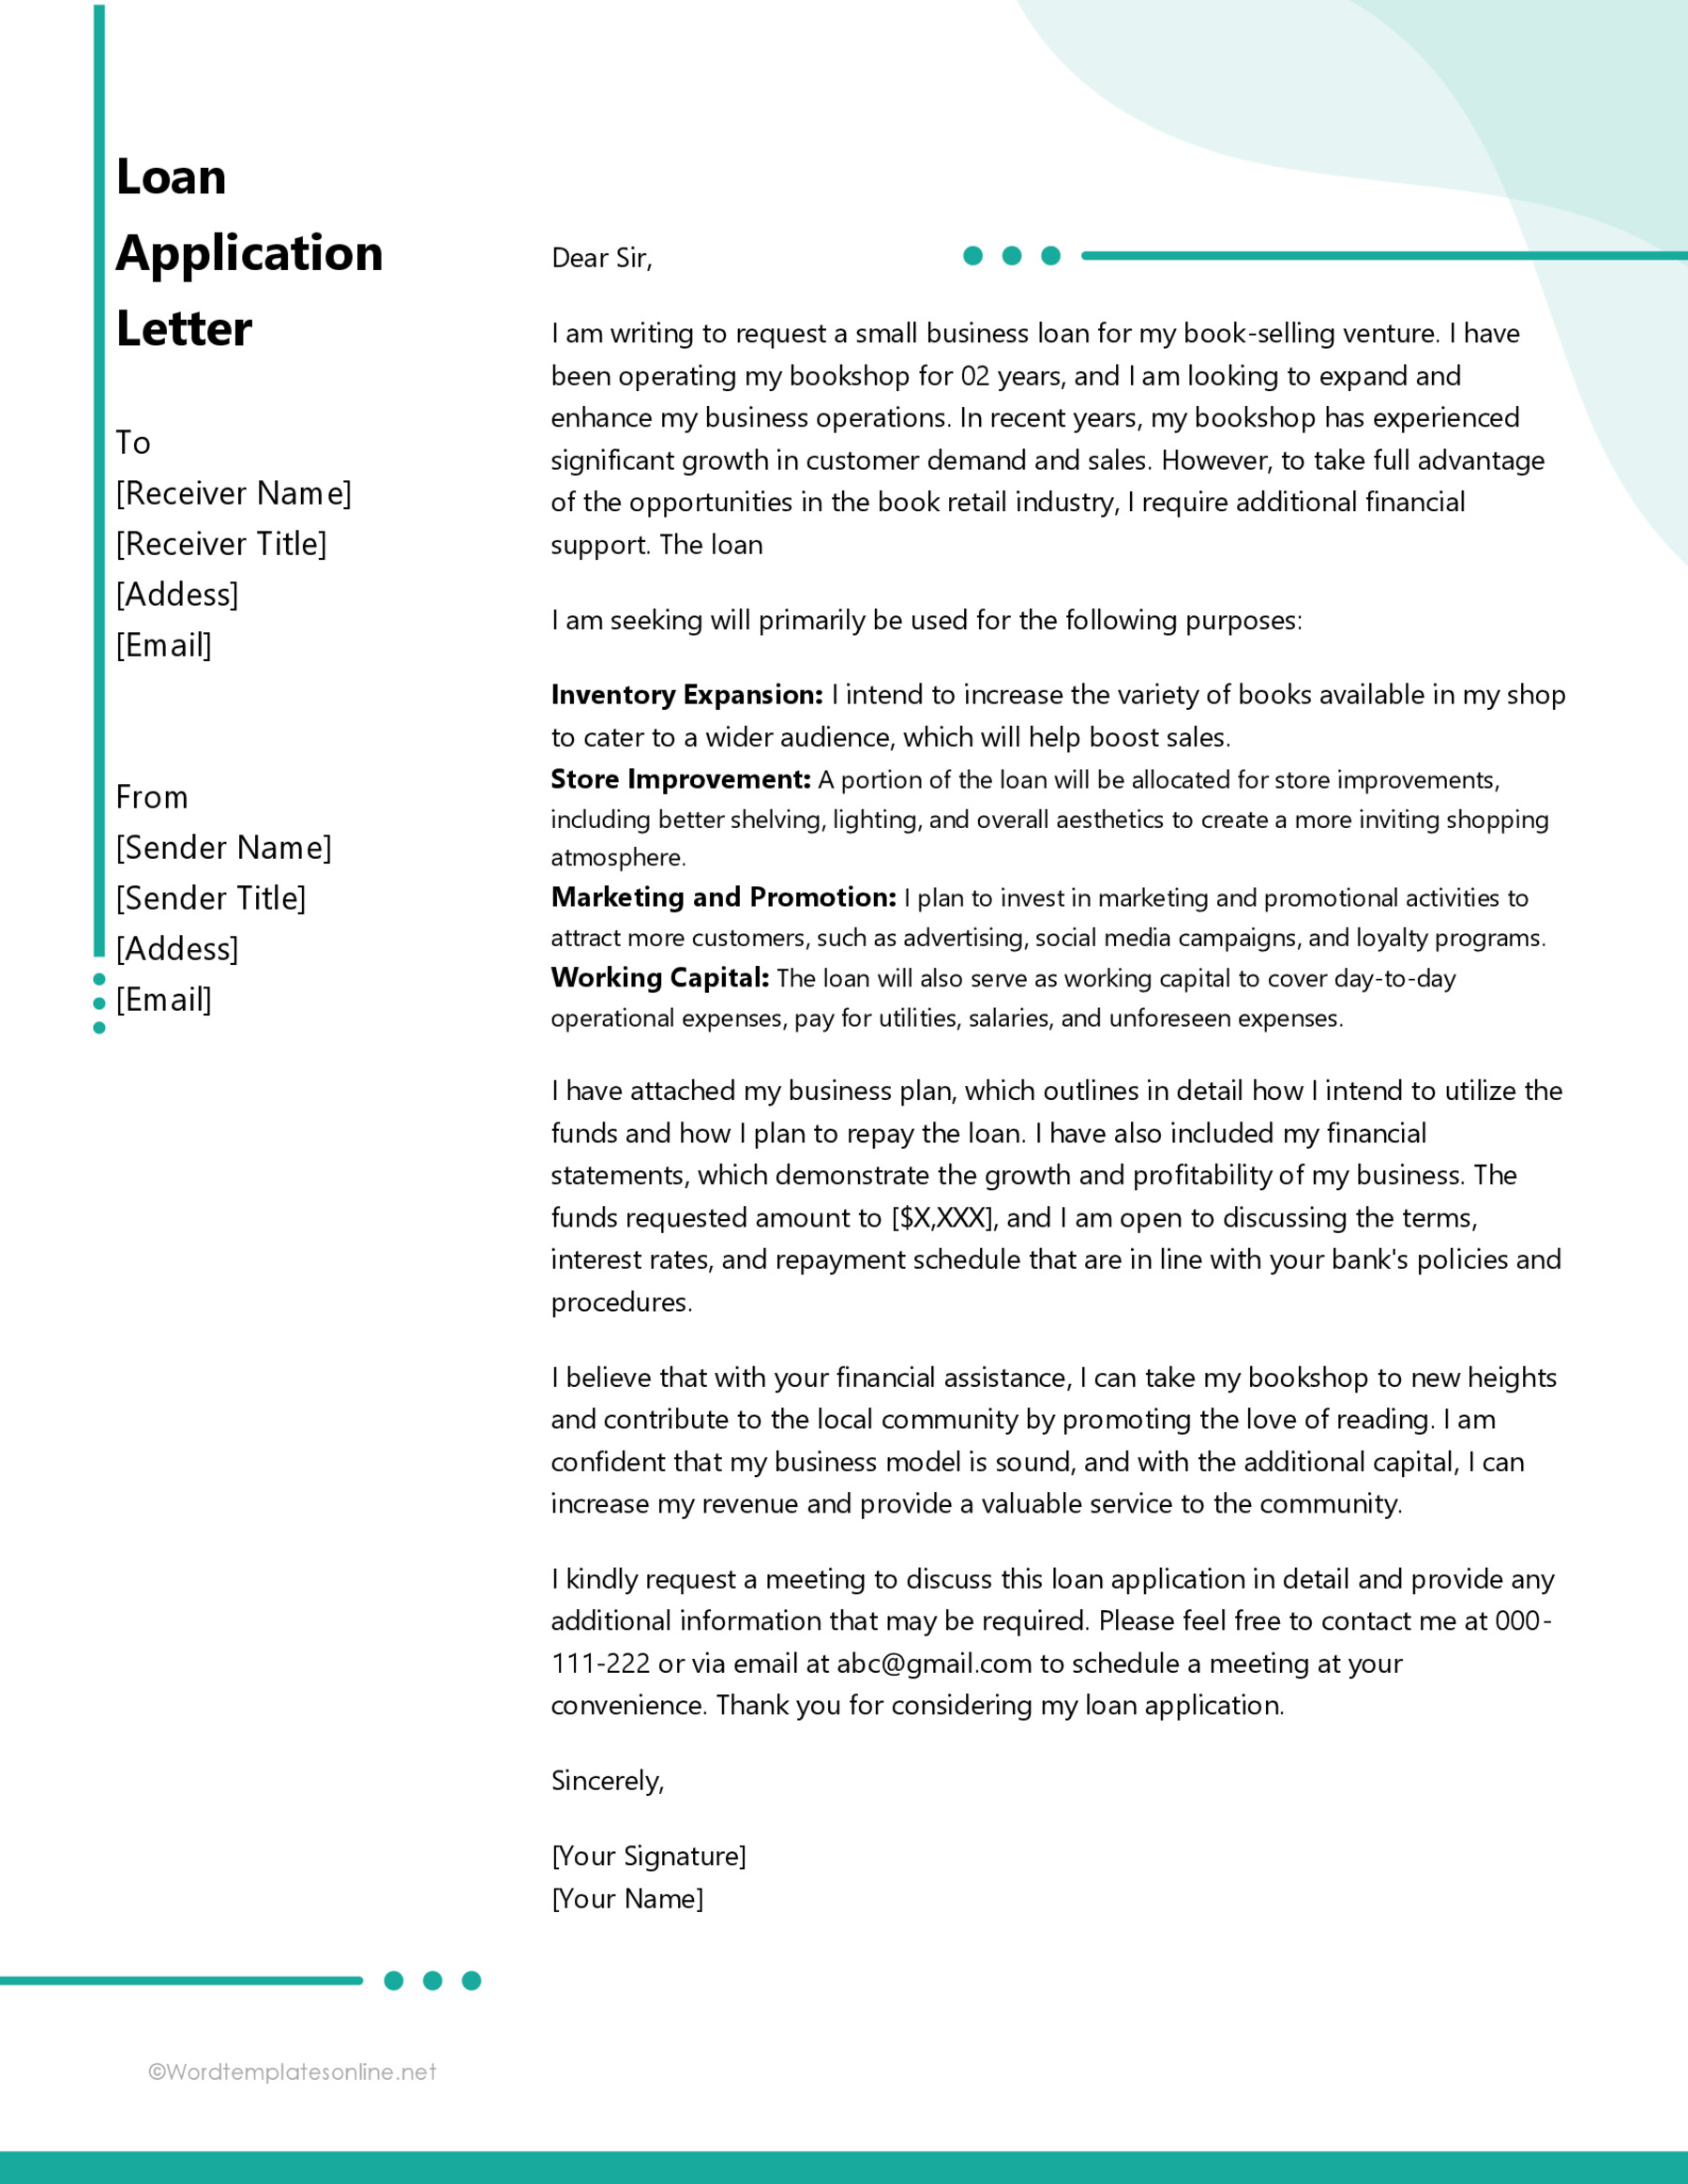 Loan Application Letter Template for Free